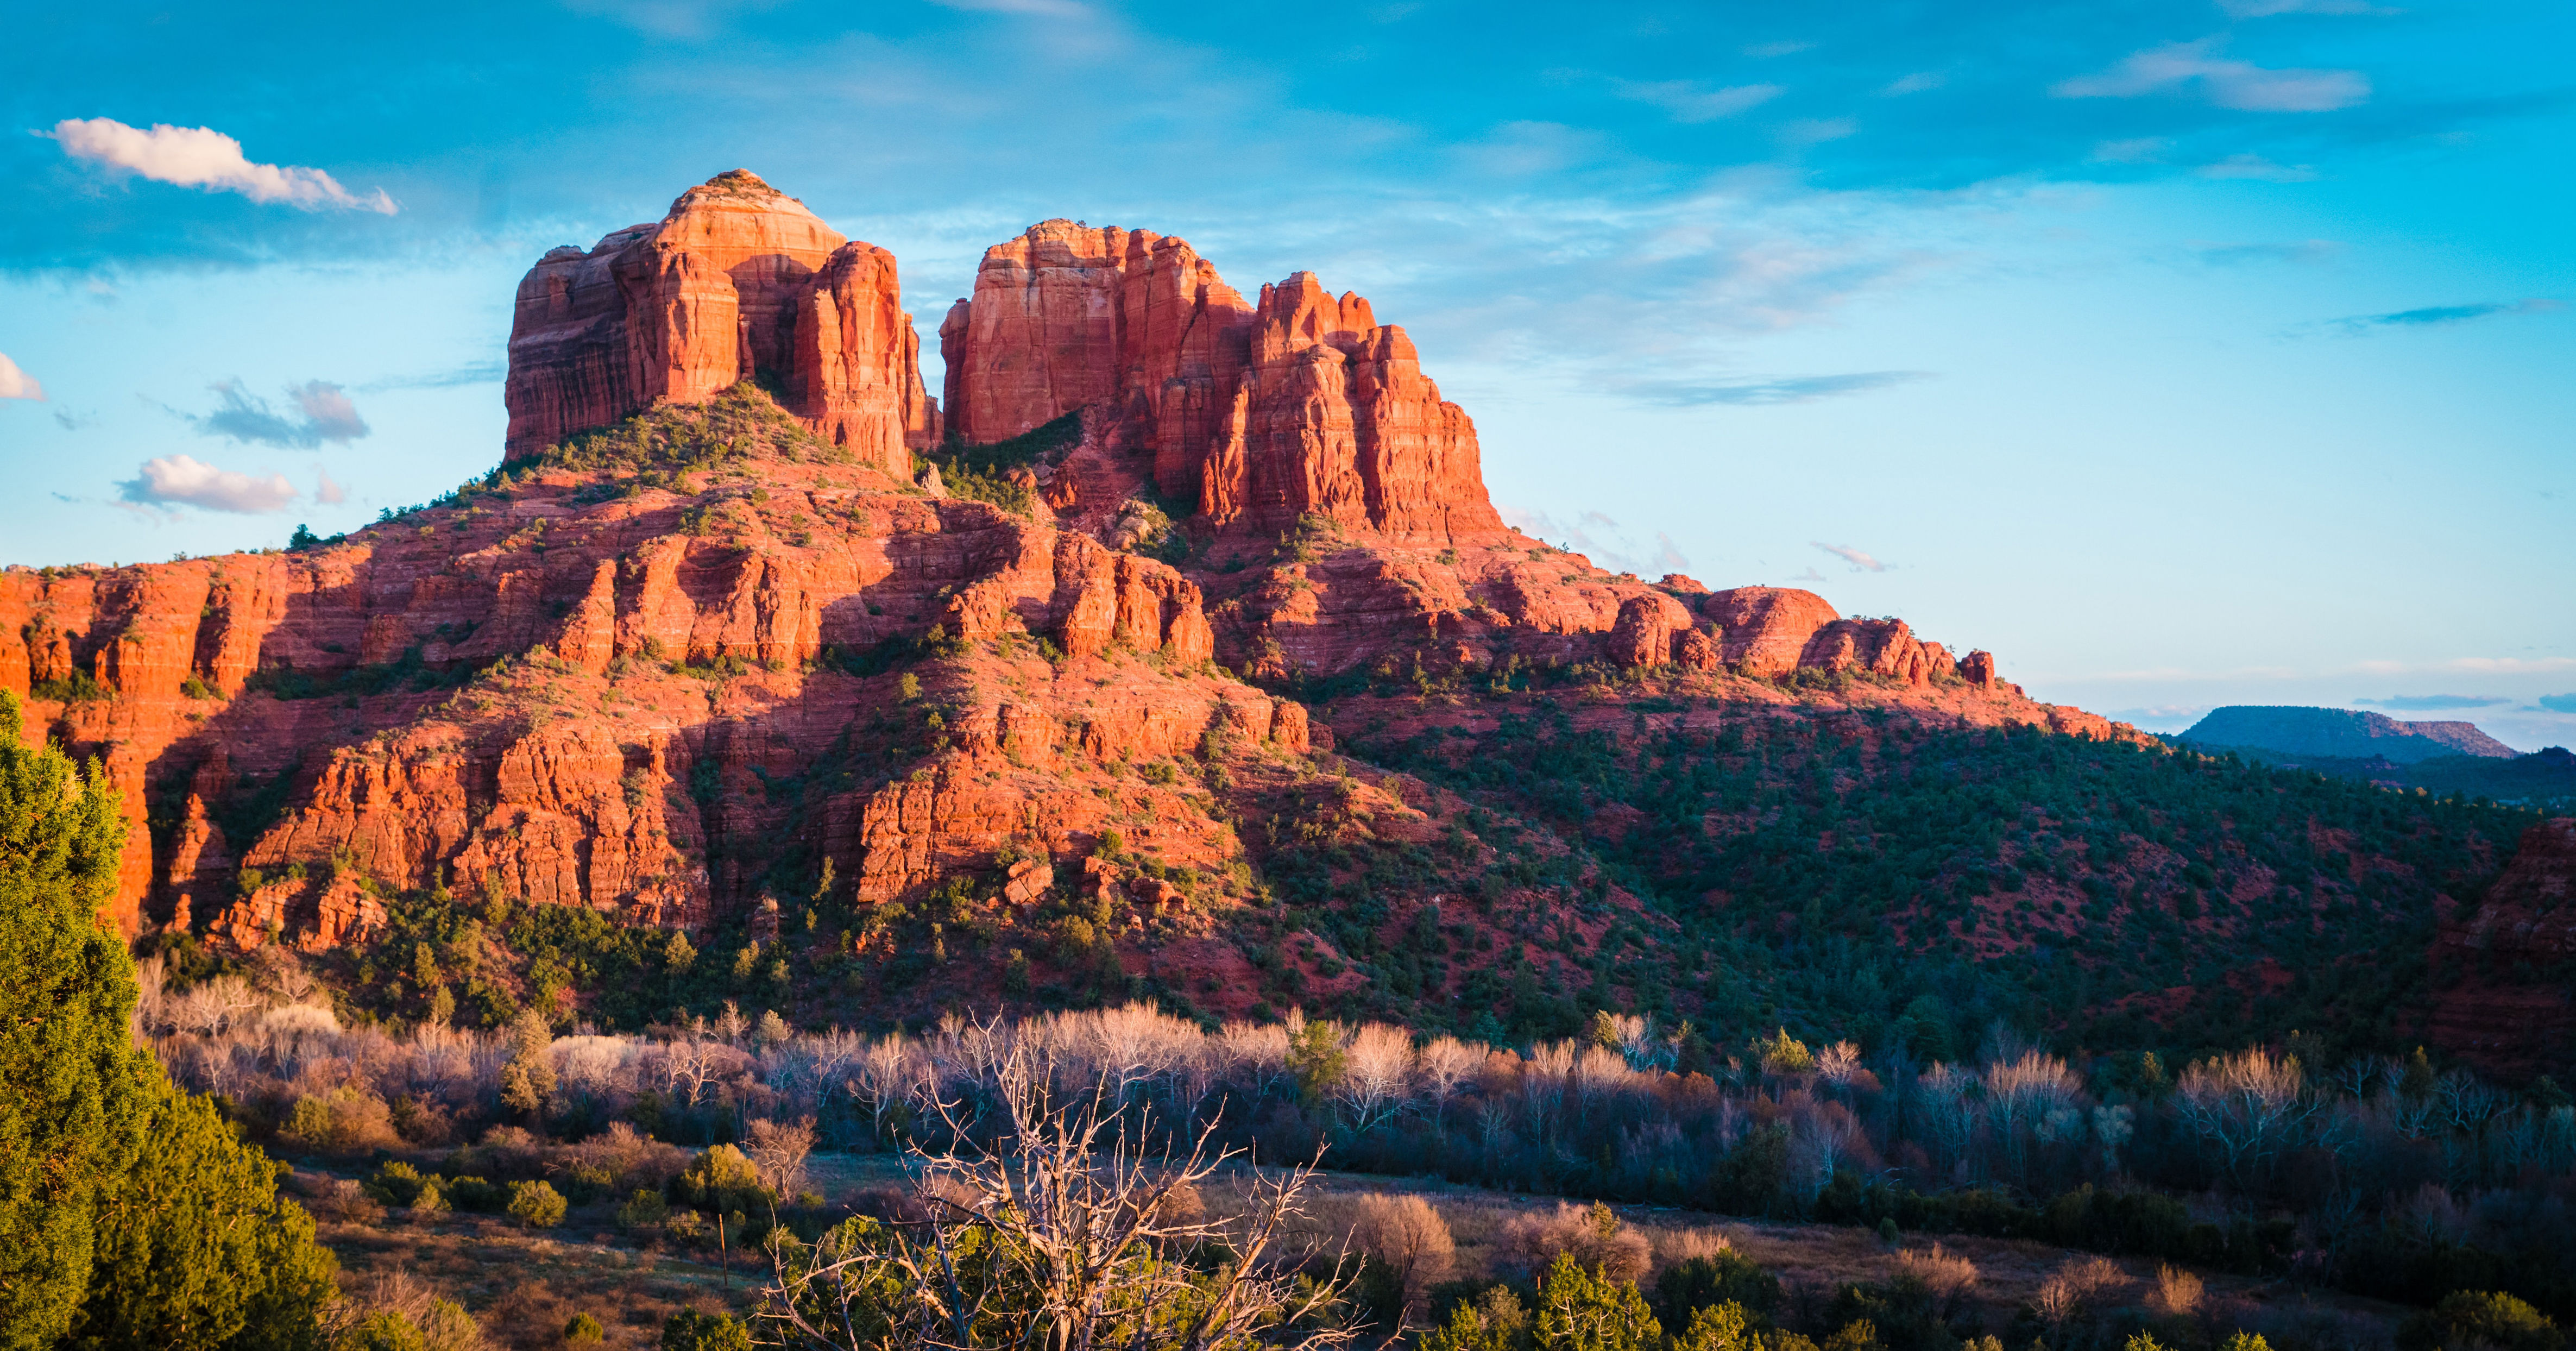 <p>Sedona is nestled within towering rock formations giving it a mystical allure.</p><p>Many believe that its unique energy vortexes are sources of spiritual power—attracting visitors who seek balance and rejuvenation.</p><p><strong>Highlights:</strong> Cathedral Rock, Oak Creek Canyon</p><p><strong>Activities to Enjoy:</strong> Hiking, mountain biking, photography</p>